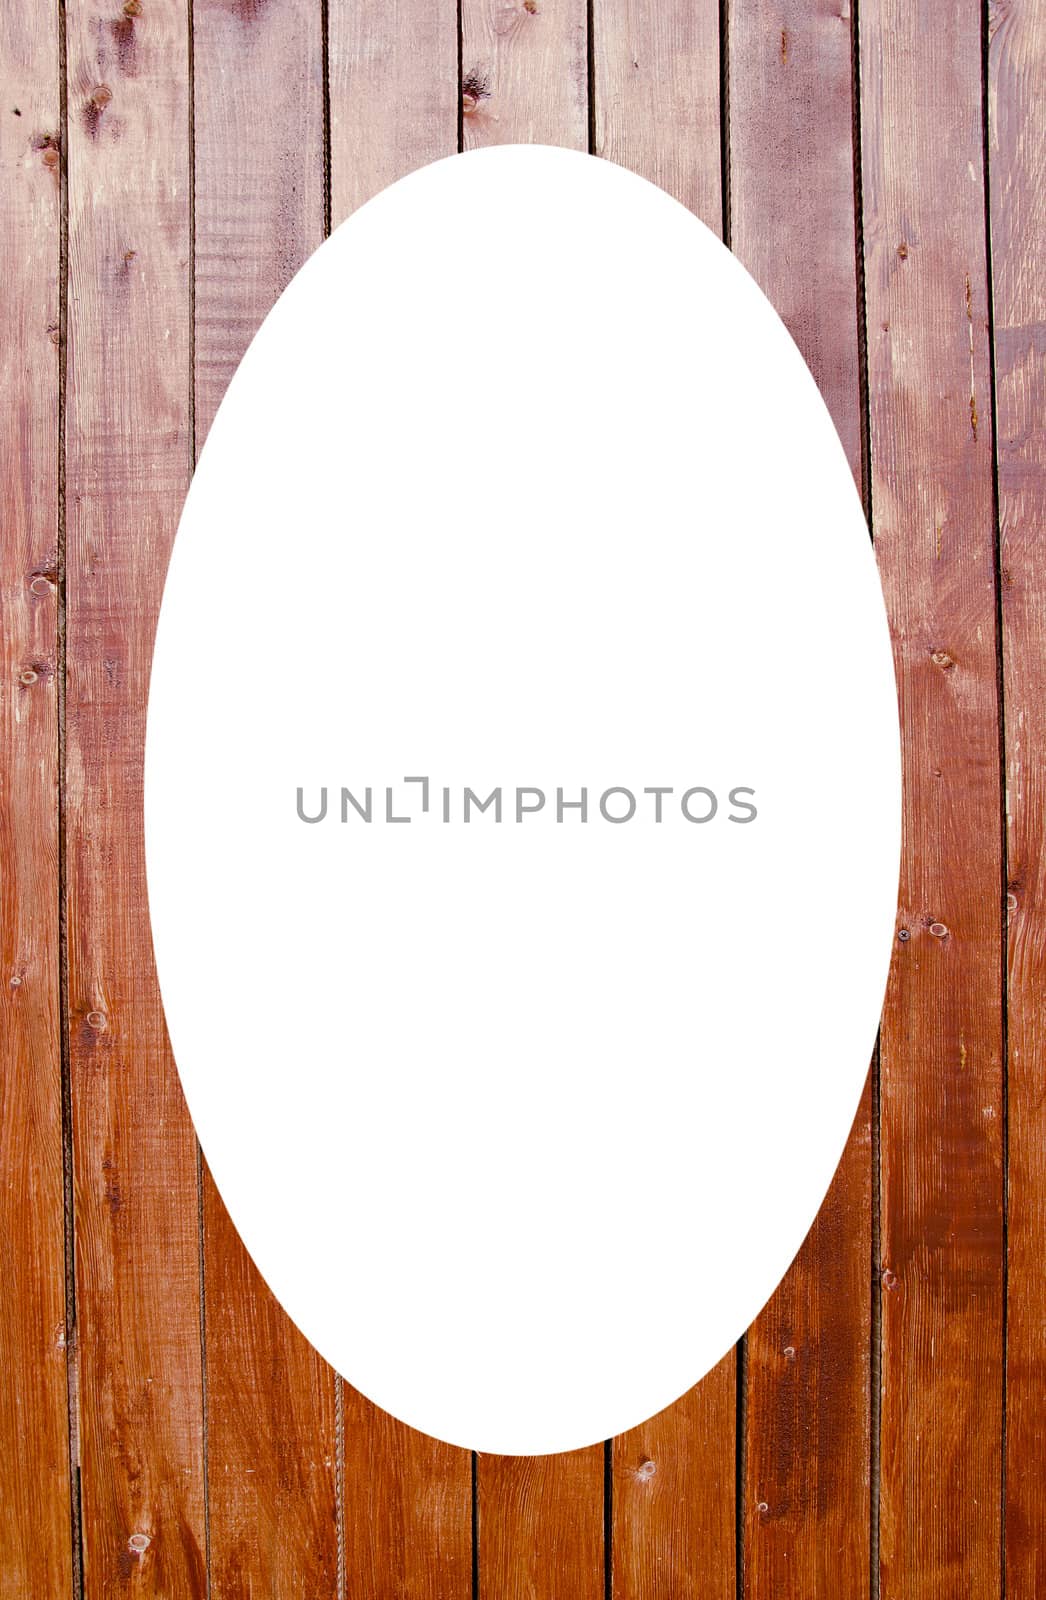 Planks wall background and white oval in center by sauletas